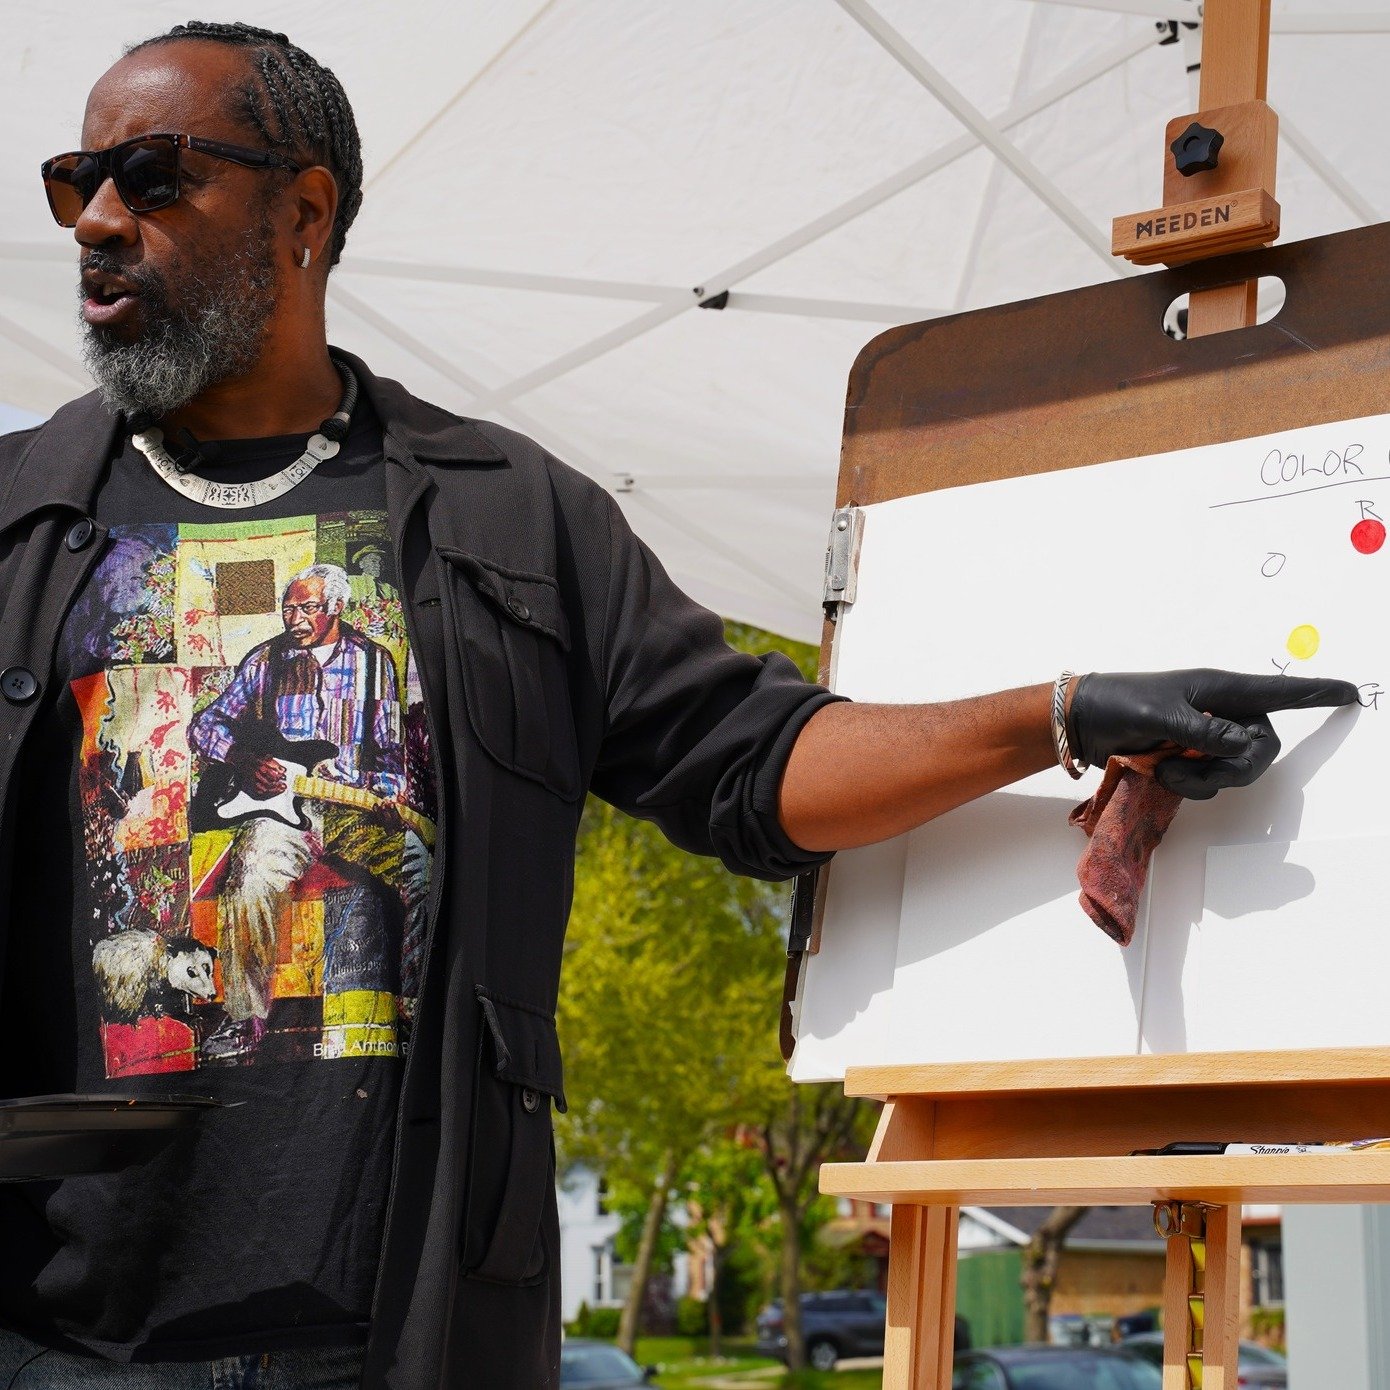 #tbt to last year's Art in the Park with artist, Brad Bernard 🎨 (@community_arts_and_funk)

Don't forget, Saturday, May 11th will be our first event at The New State Music Park!